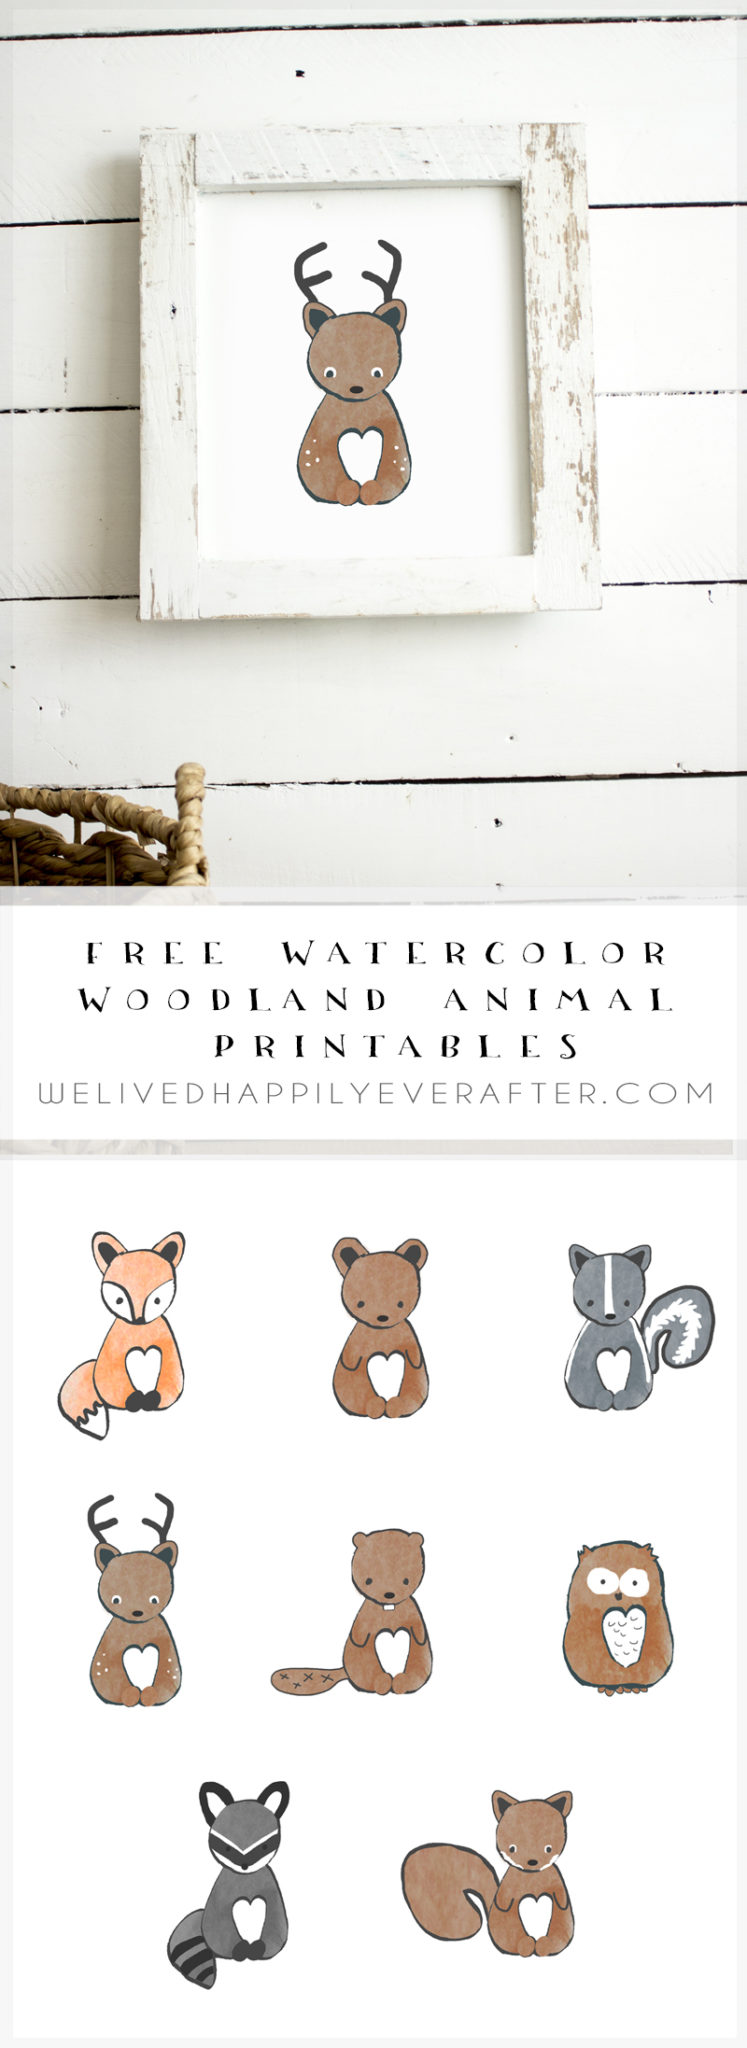 Free Watercolor Forest Woodland Animal Nursery Prints We Lived Happily Ever After